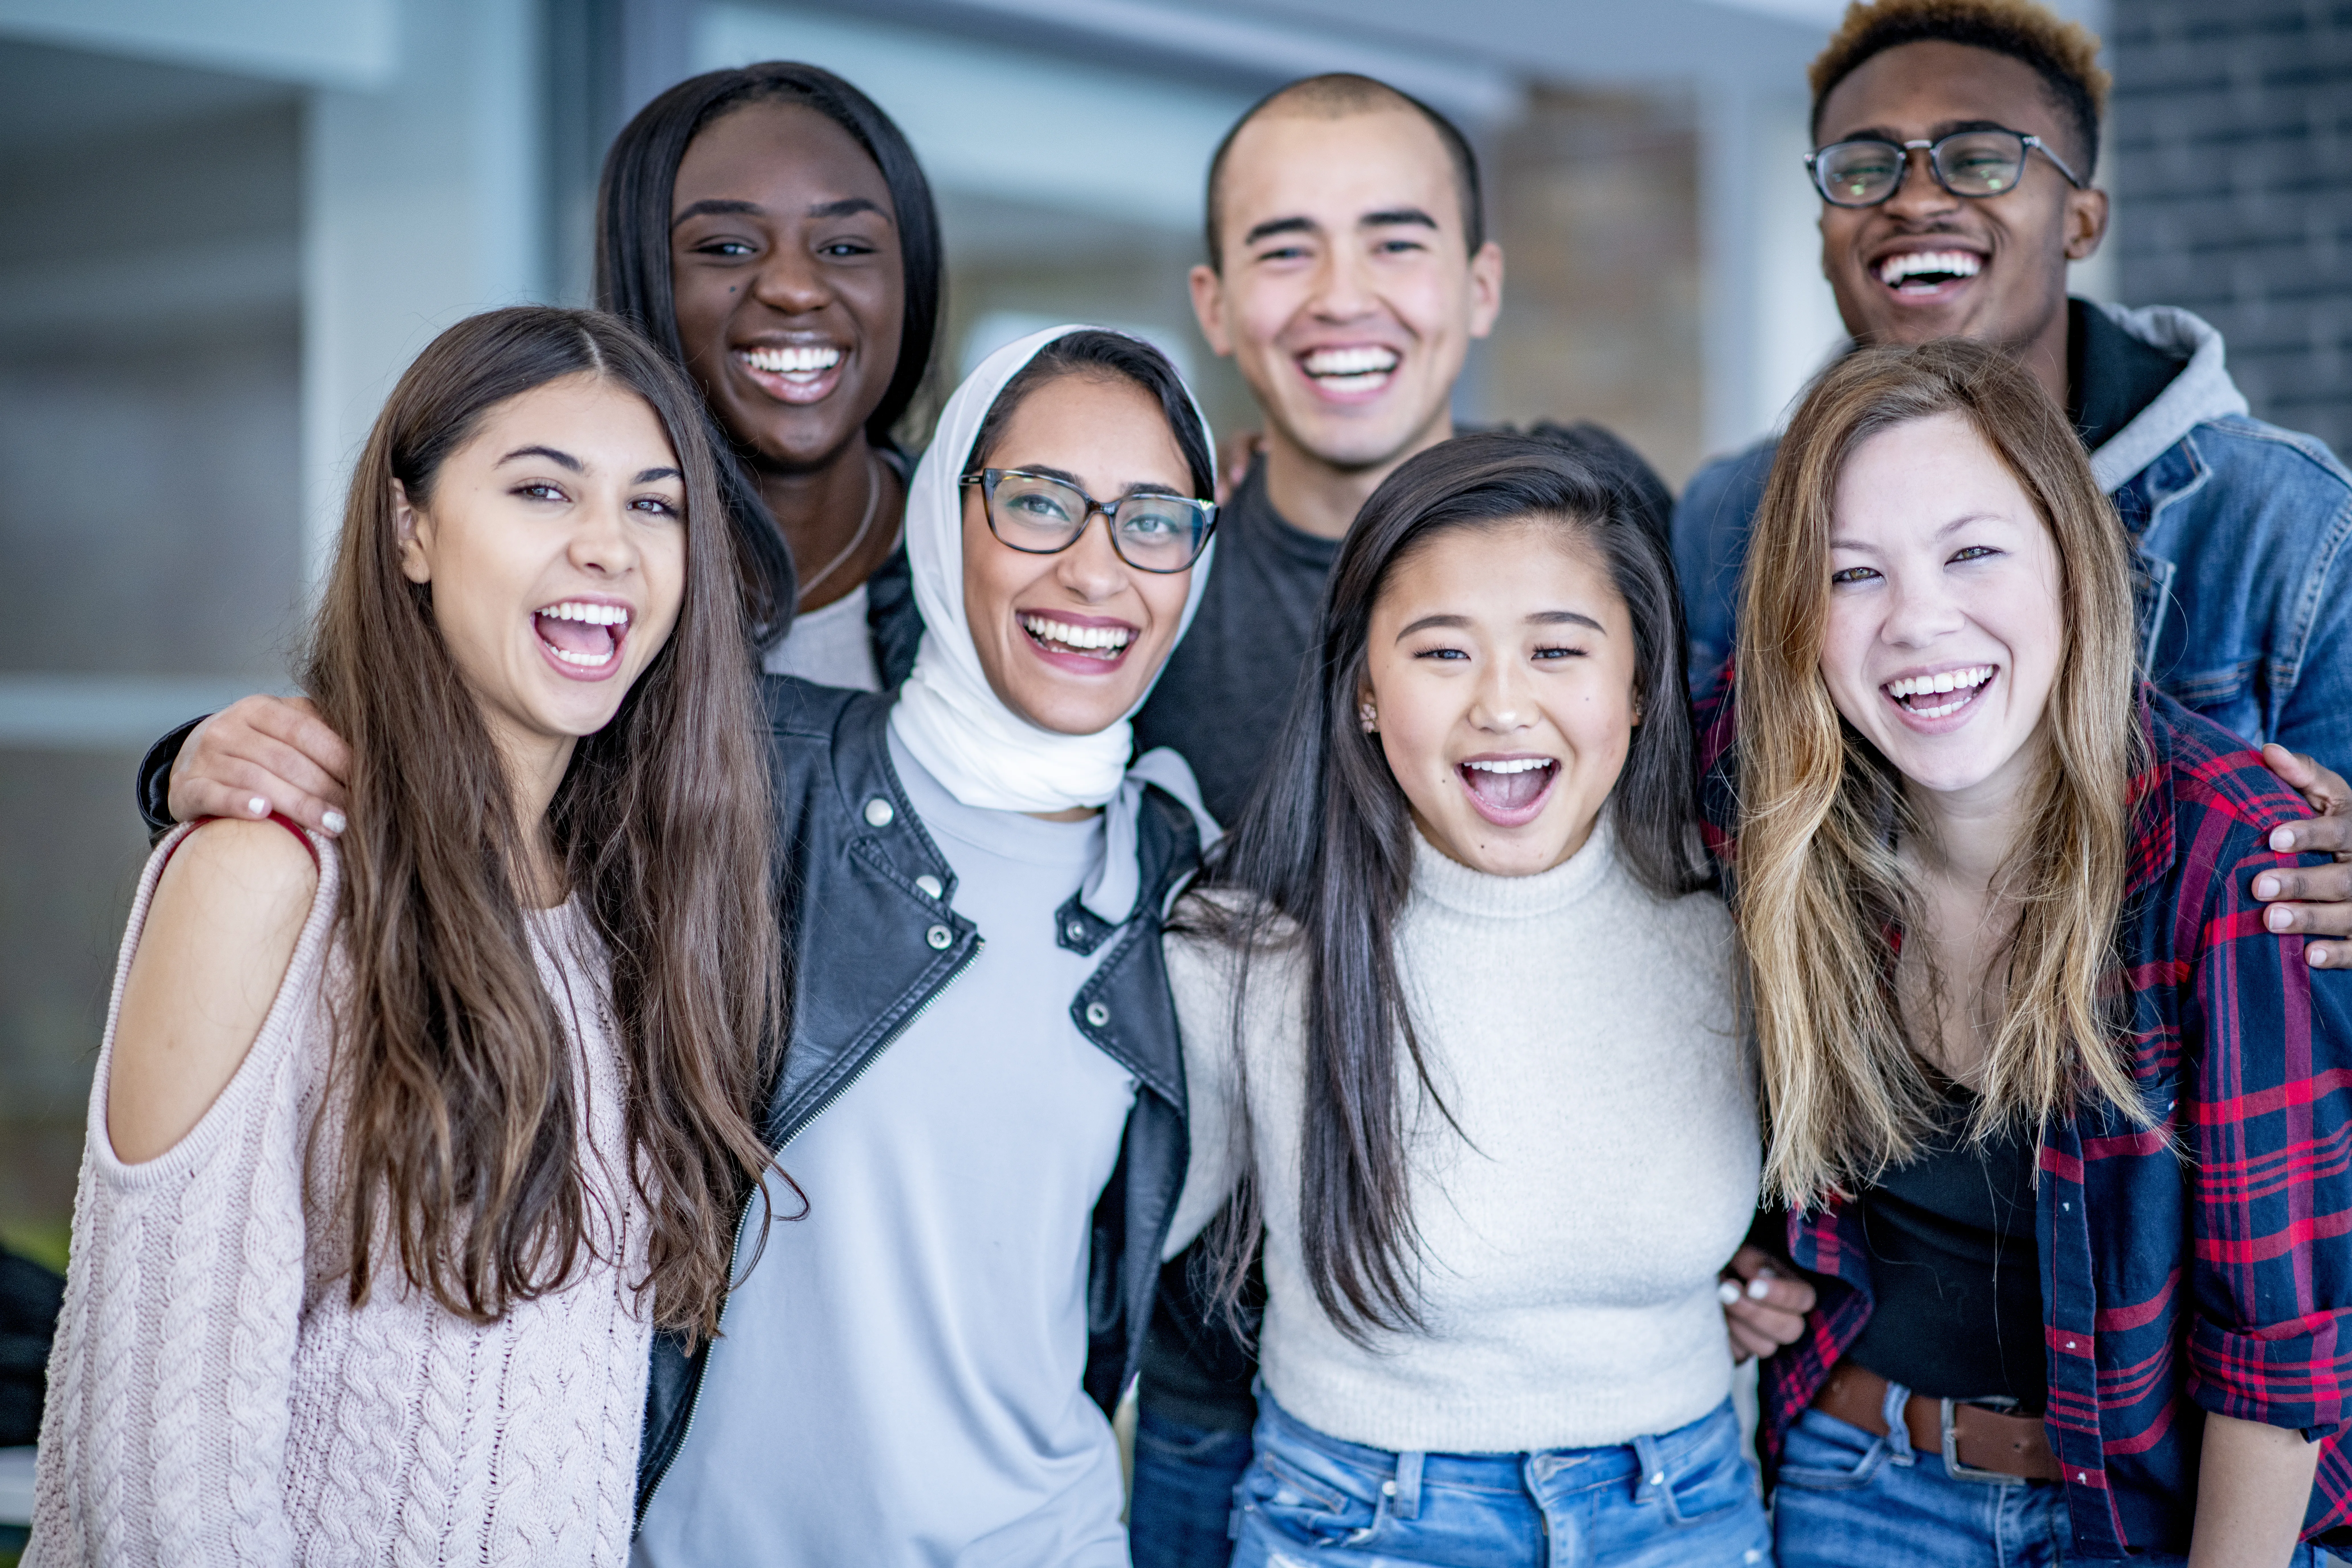 A varying group of young adults stand and smile with their arms around each other. They could be university or college students.